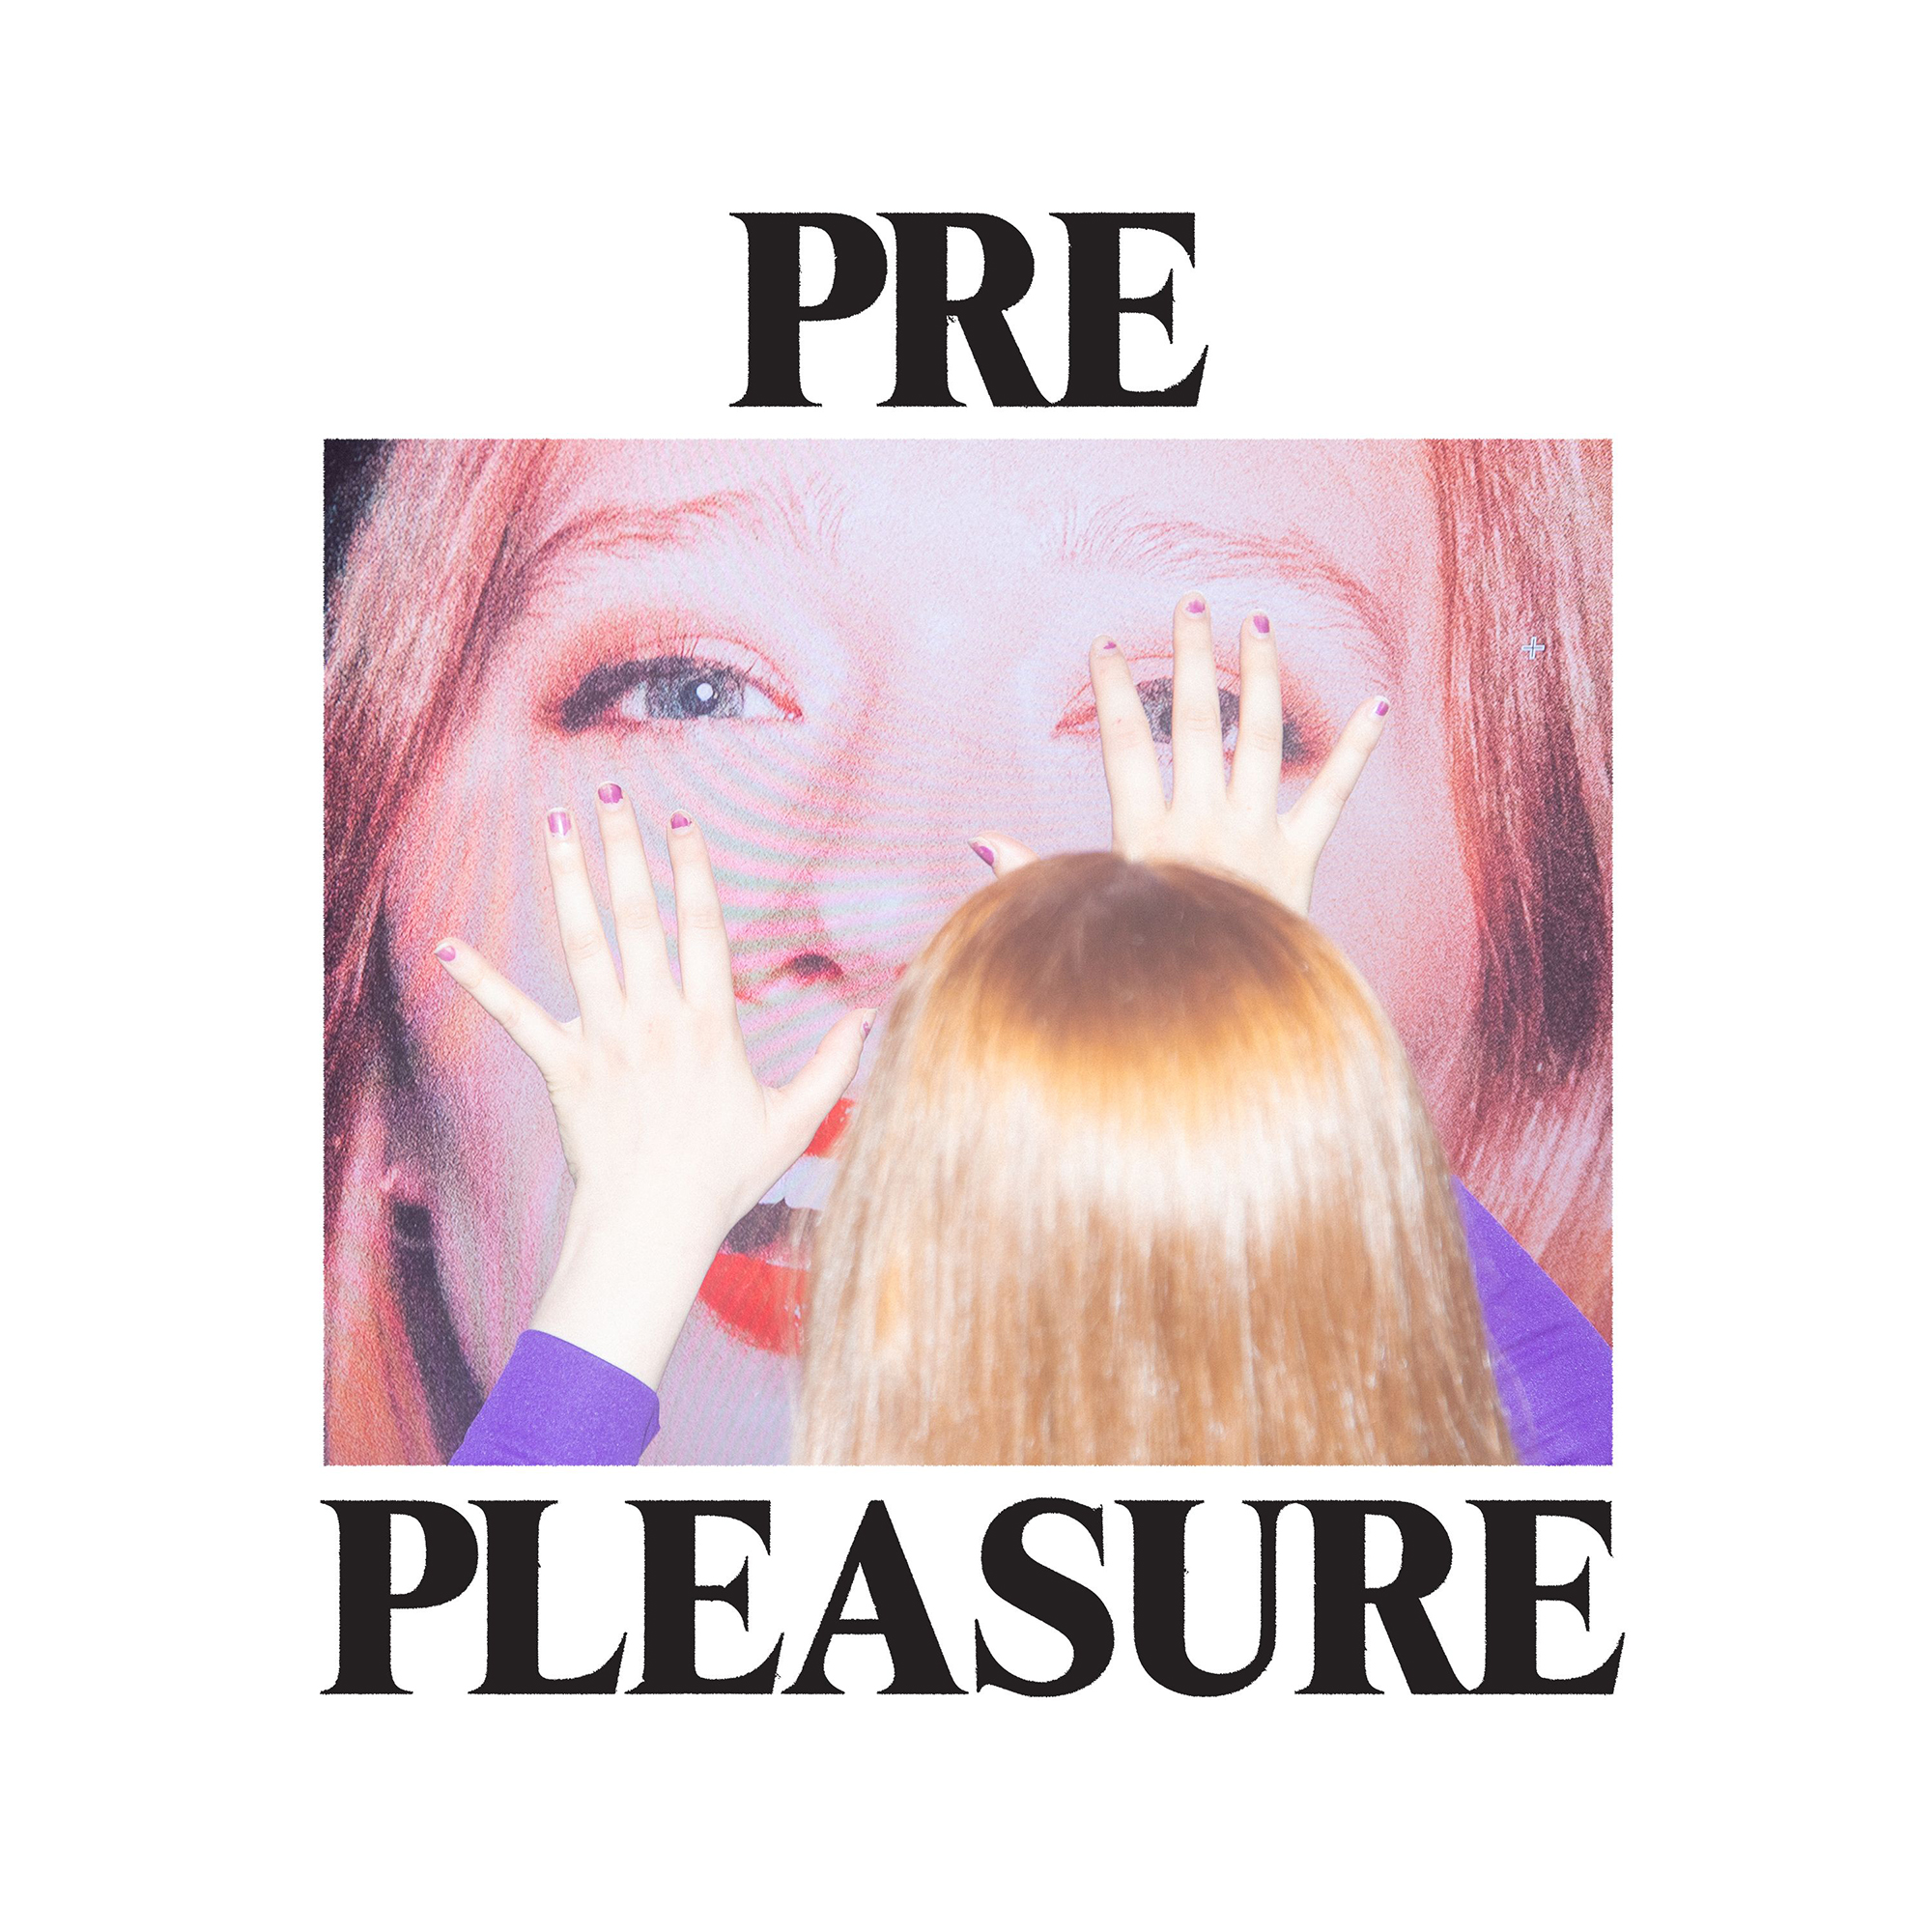 Forced Foot Smother - Julia Jacklin - New album PRE PLEASURE out August 26, 2022. Pre-order now  and stream the first single, \